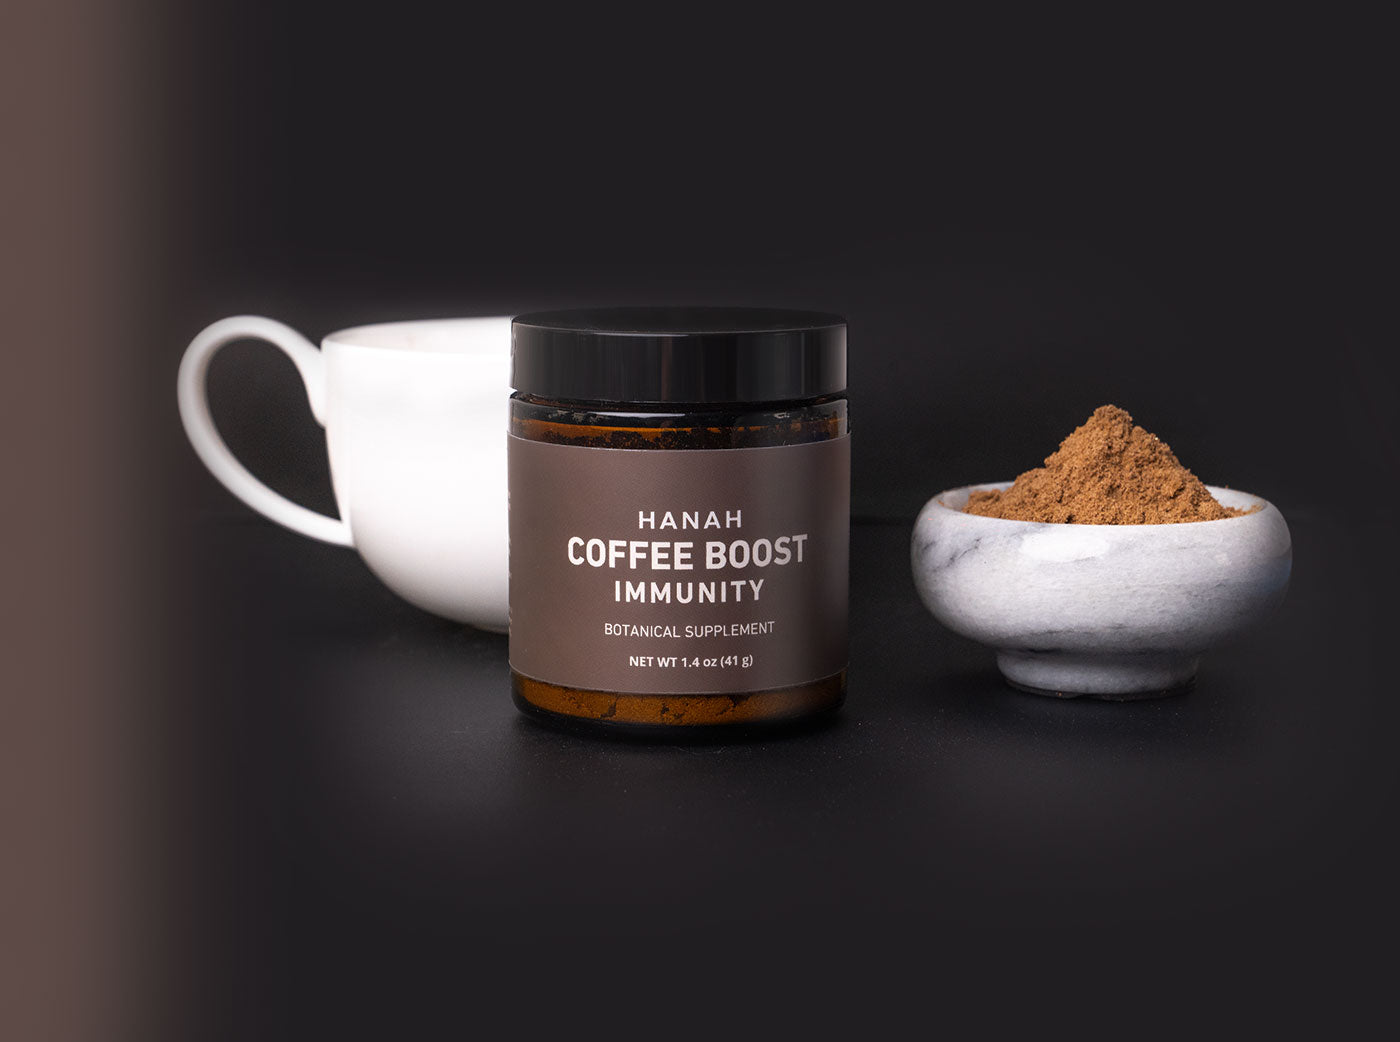 Jar of HANAH Coffee Boost Immunity, a botanical supplement, next to its contents in a marble bowl and cup